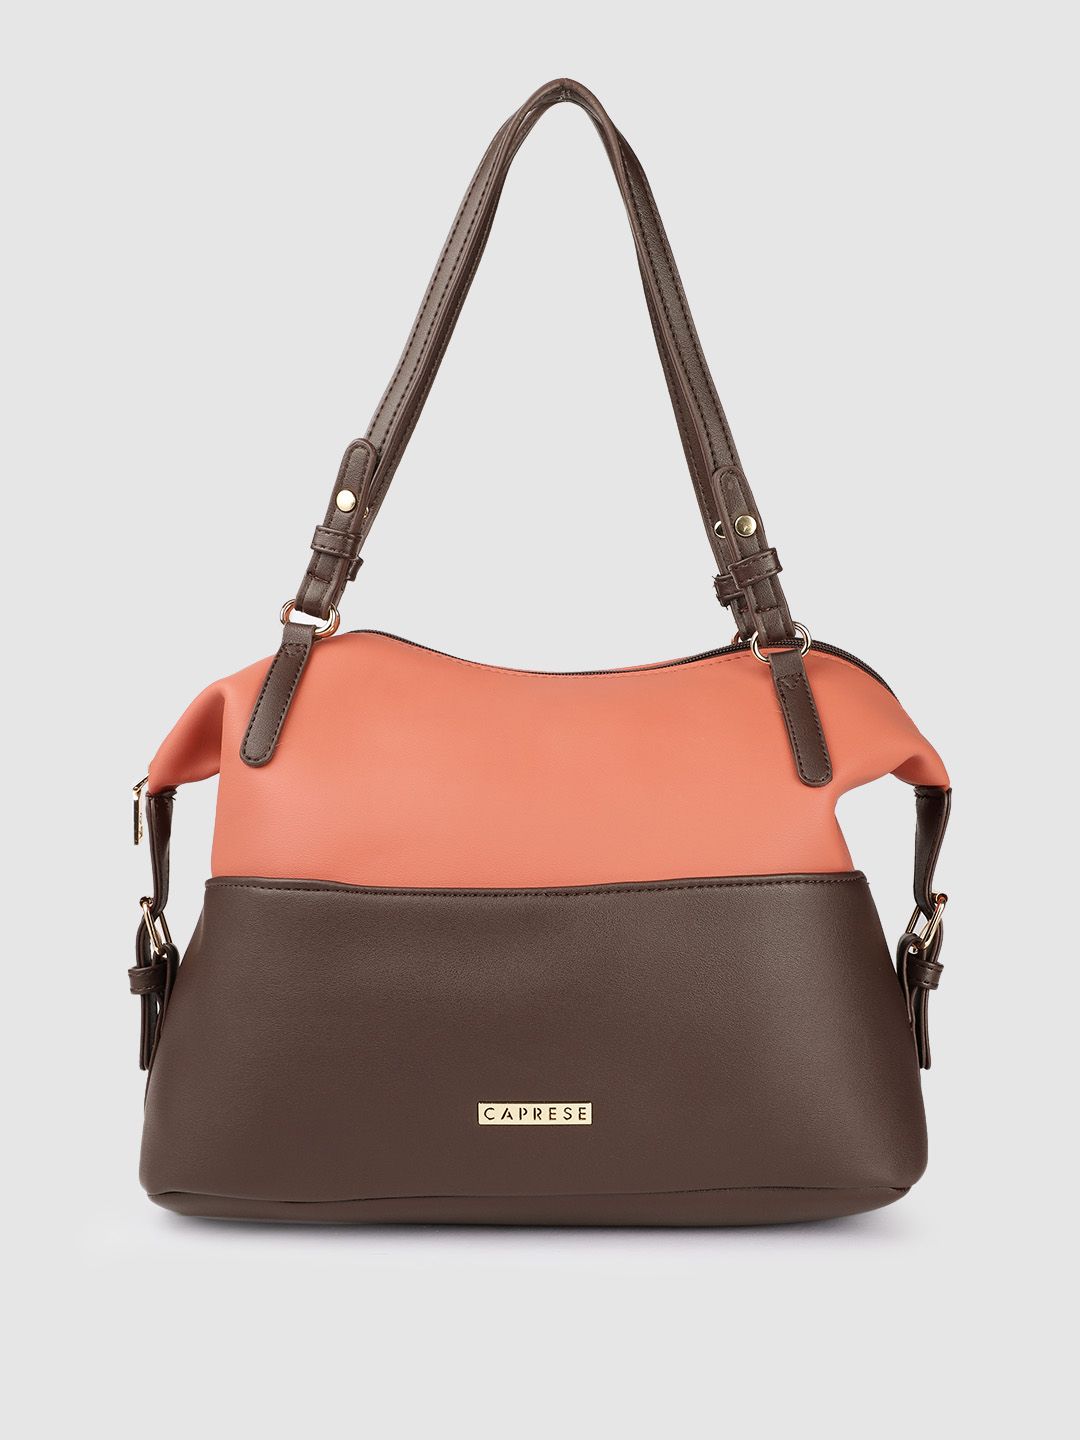 Caprese Peach-Coloured and Brown Colourblocked Leather Structured Shoulder Bag Price in India